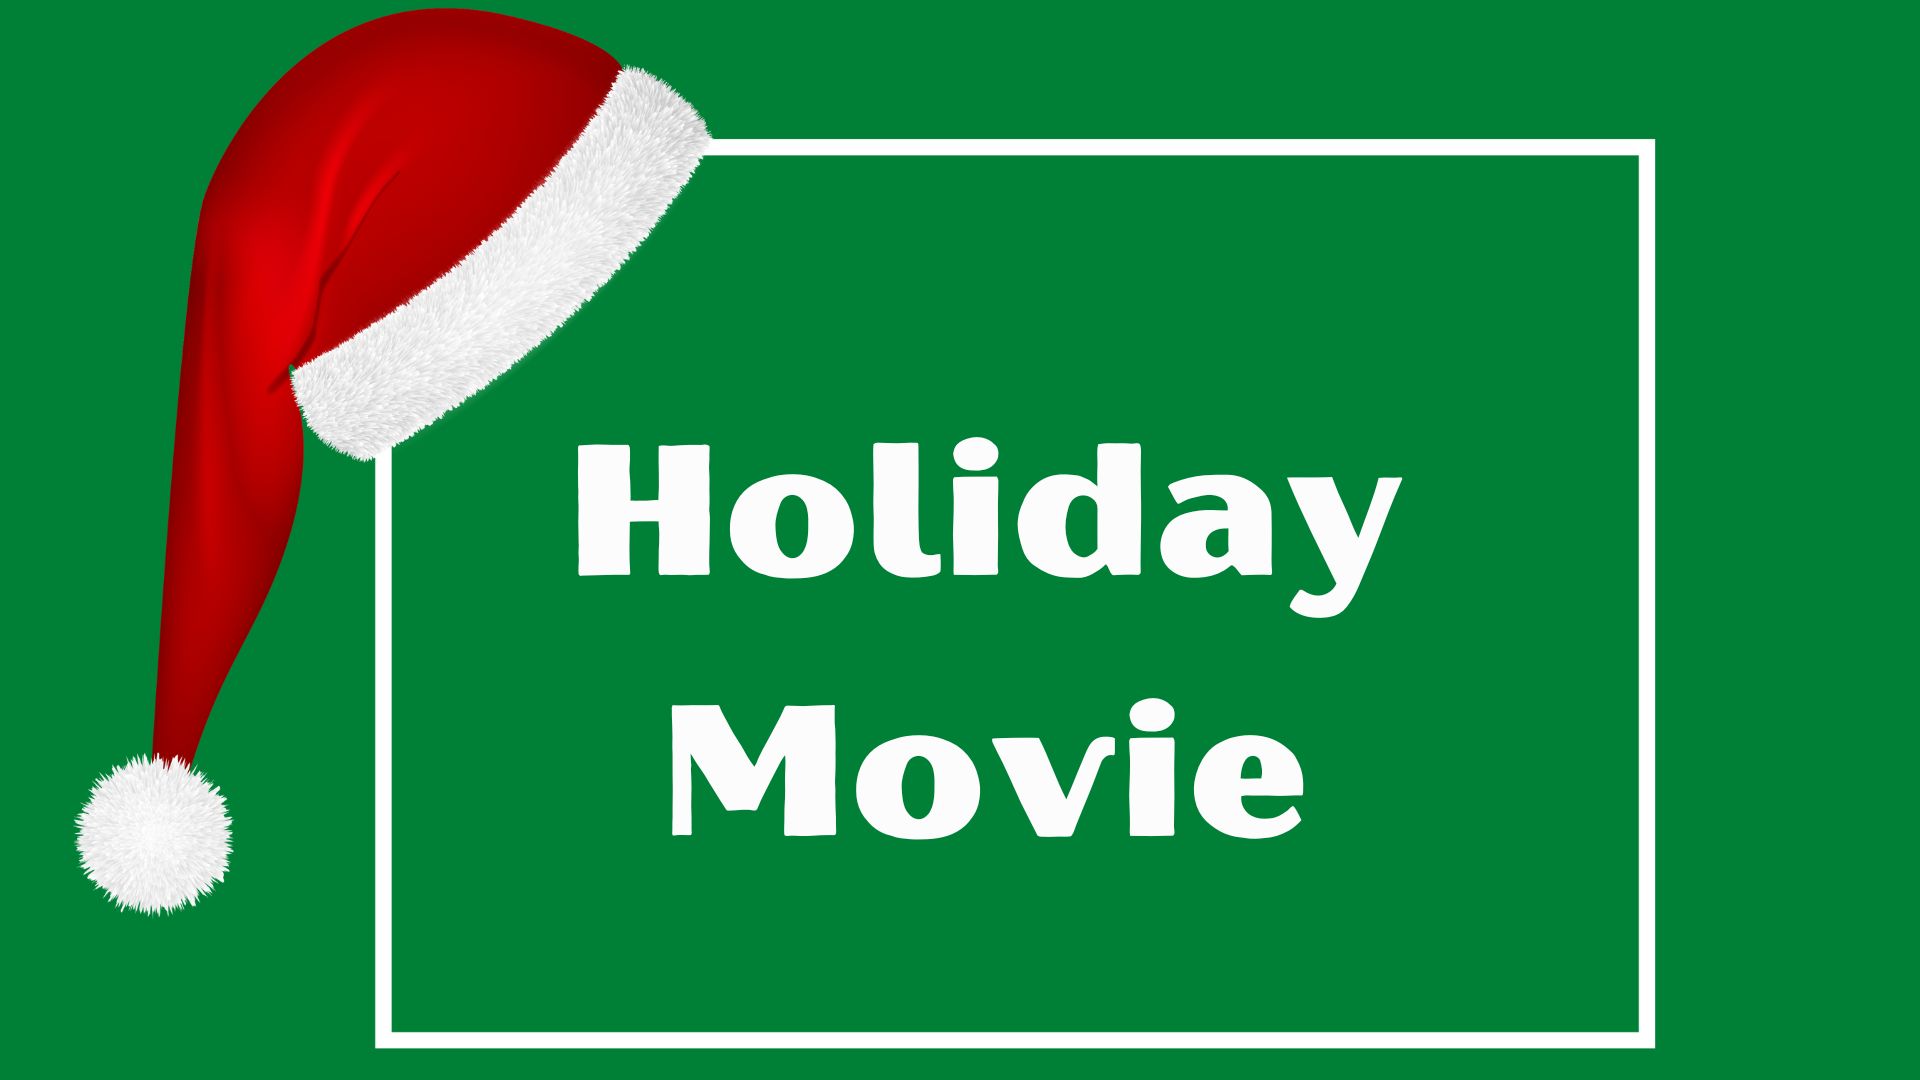 Text: Holiday Movie (with Santa hat)